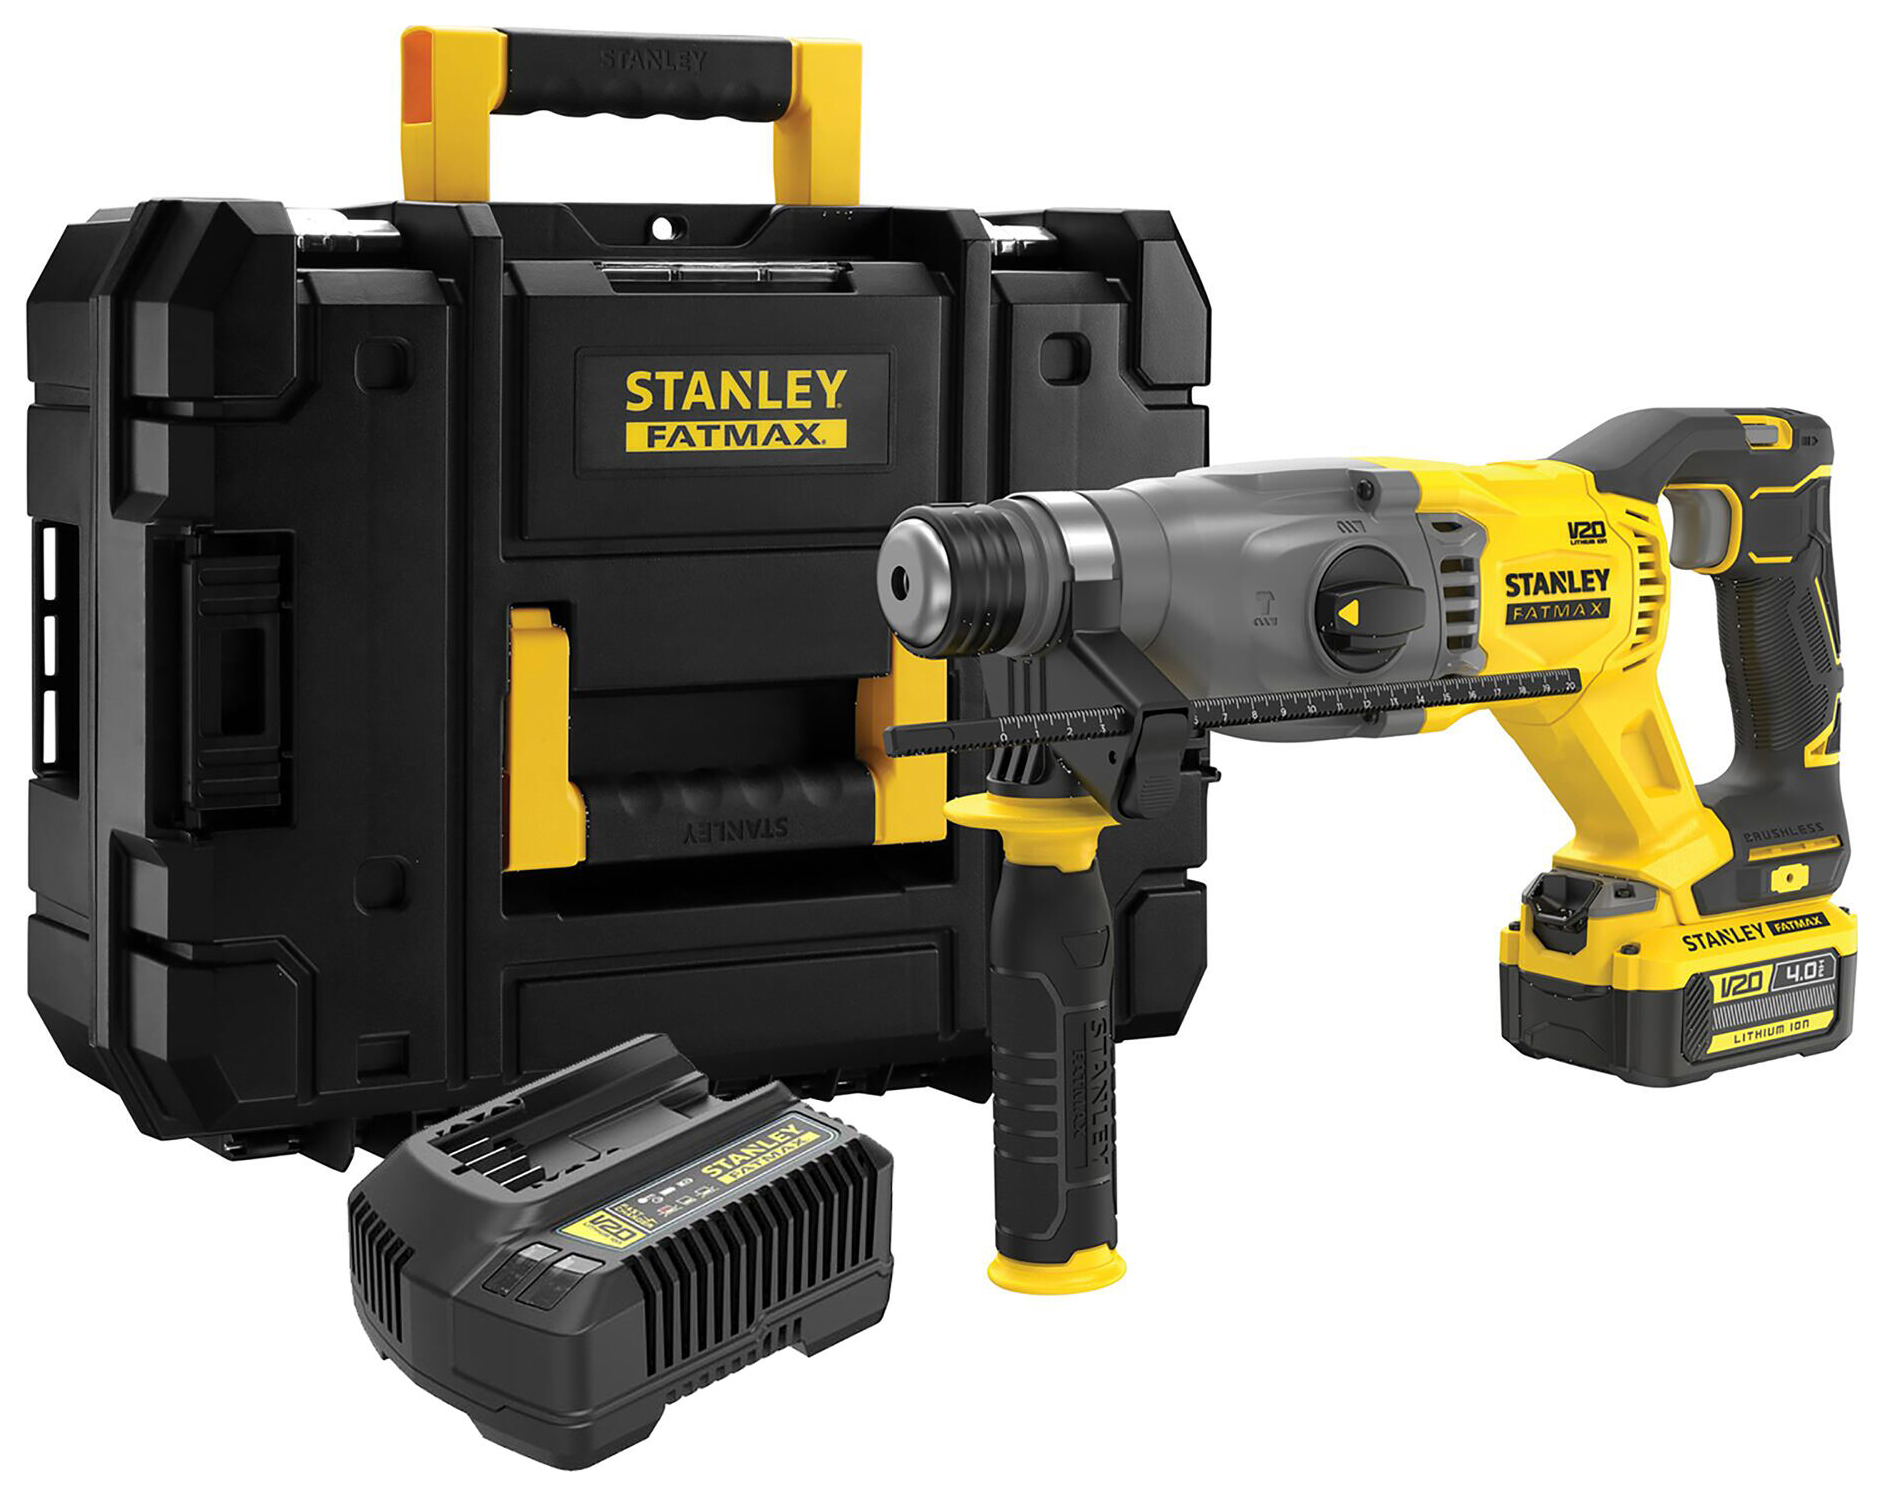 Stanley FatMax V20 SFMCH900m12-GB 18V 1 x 4.0AH Cordless Brushless SDS+ Drill with Pro Stack Case